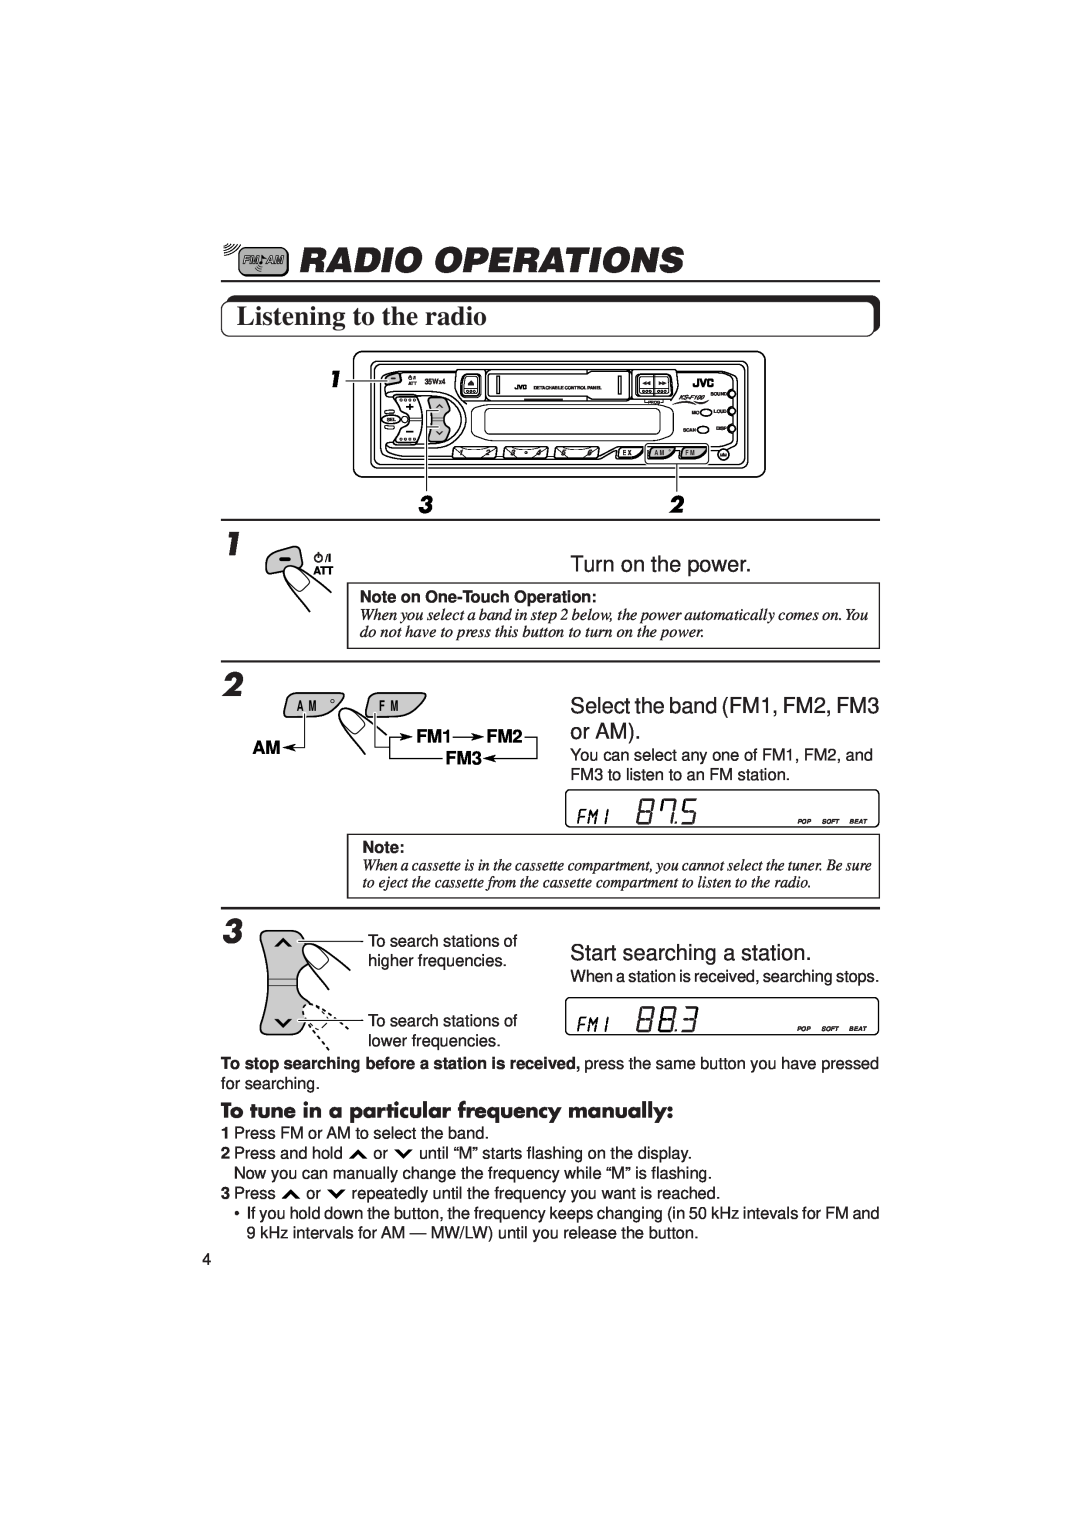 JVC KS F100 Radio Operations, Listening to the radio, 1 /I, Select the band FM1, FM2, FM3 or AM, Start searching a station 